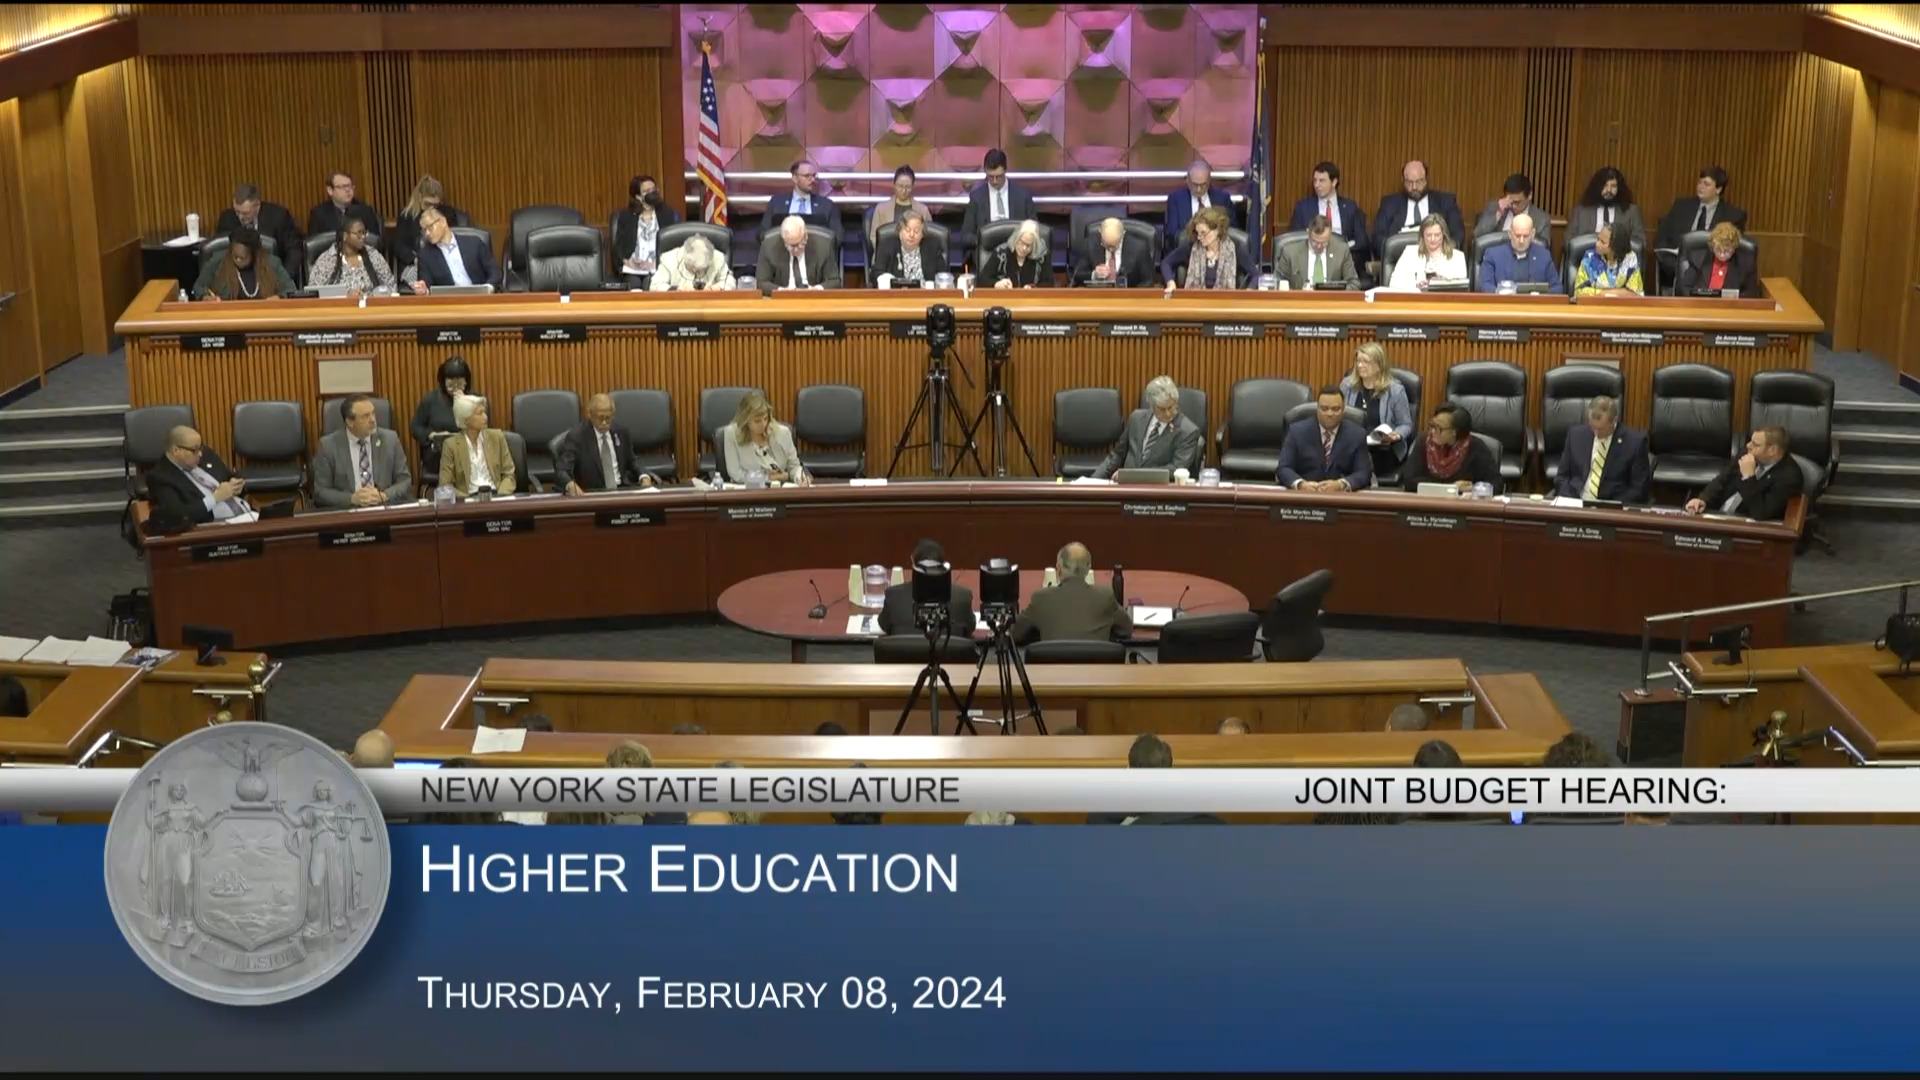 SUNY Chancellor Testifies During Budget Hearing on Higher Education